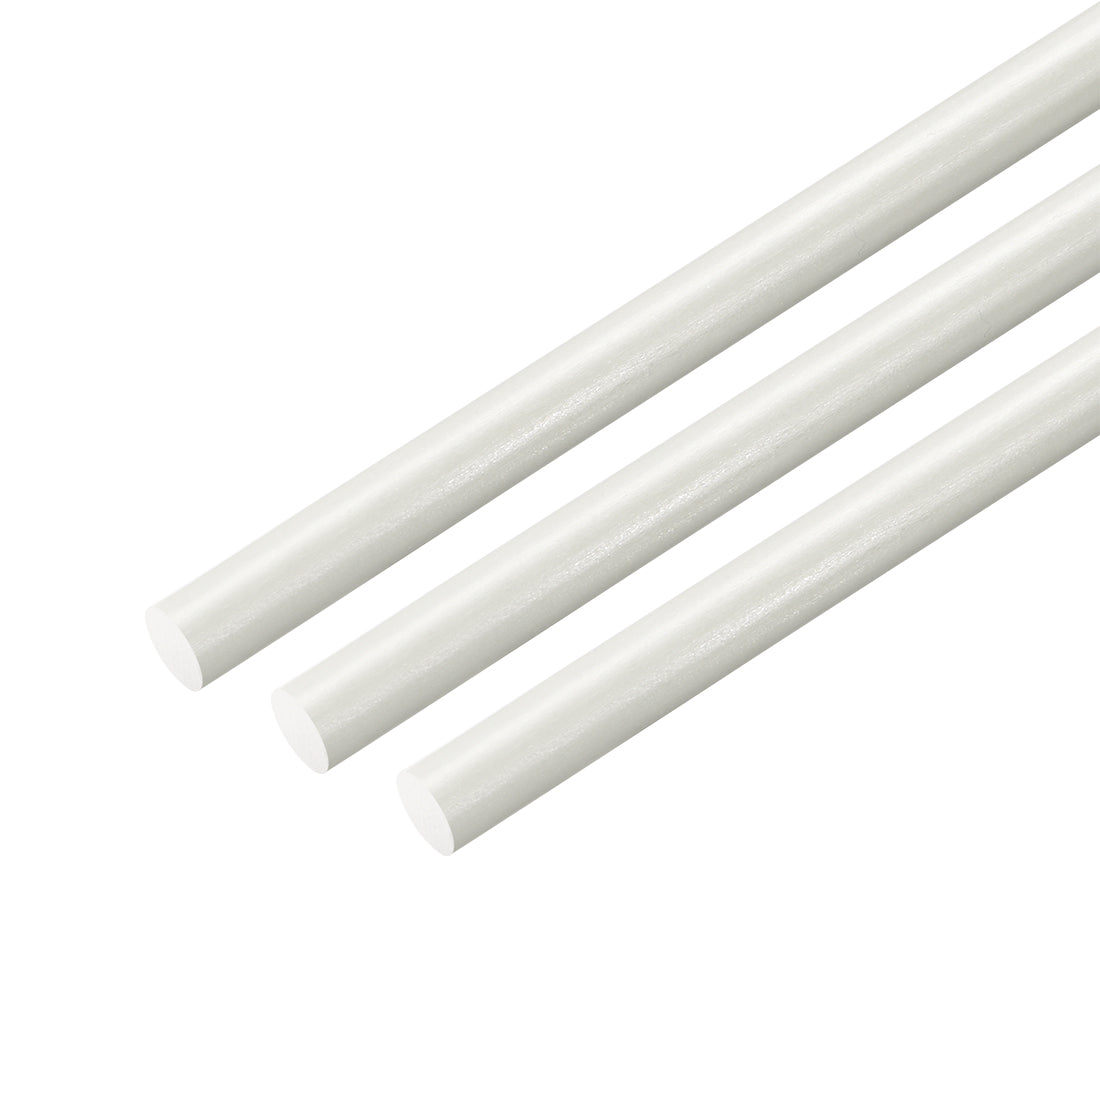 uxcell Uxcell FRP Fiberglass Round Rod,5mm Dia 50cm Long,White Engineering Round Bars 3pcs